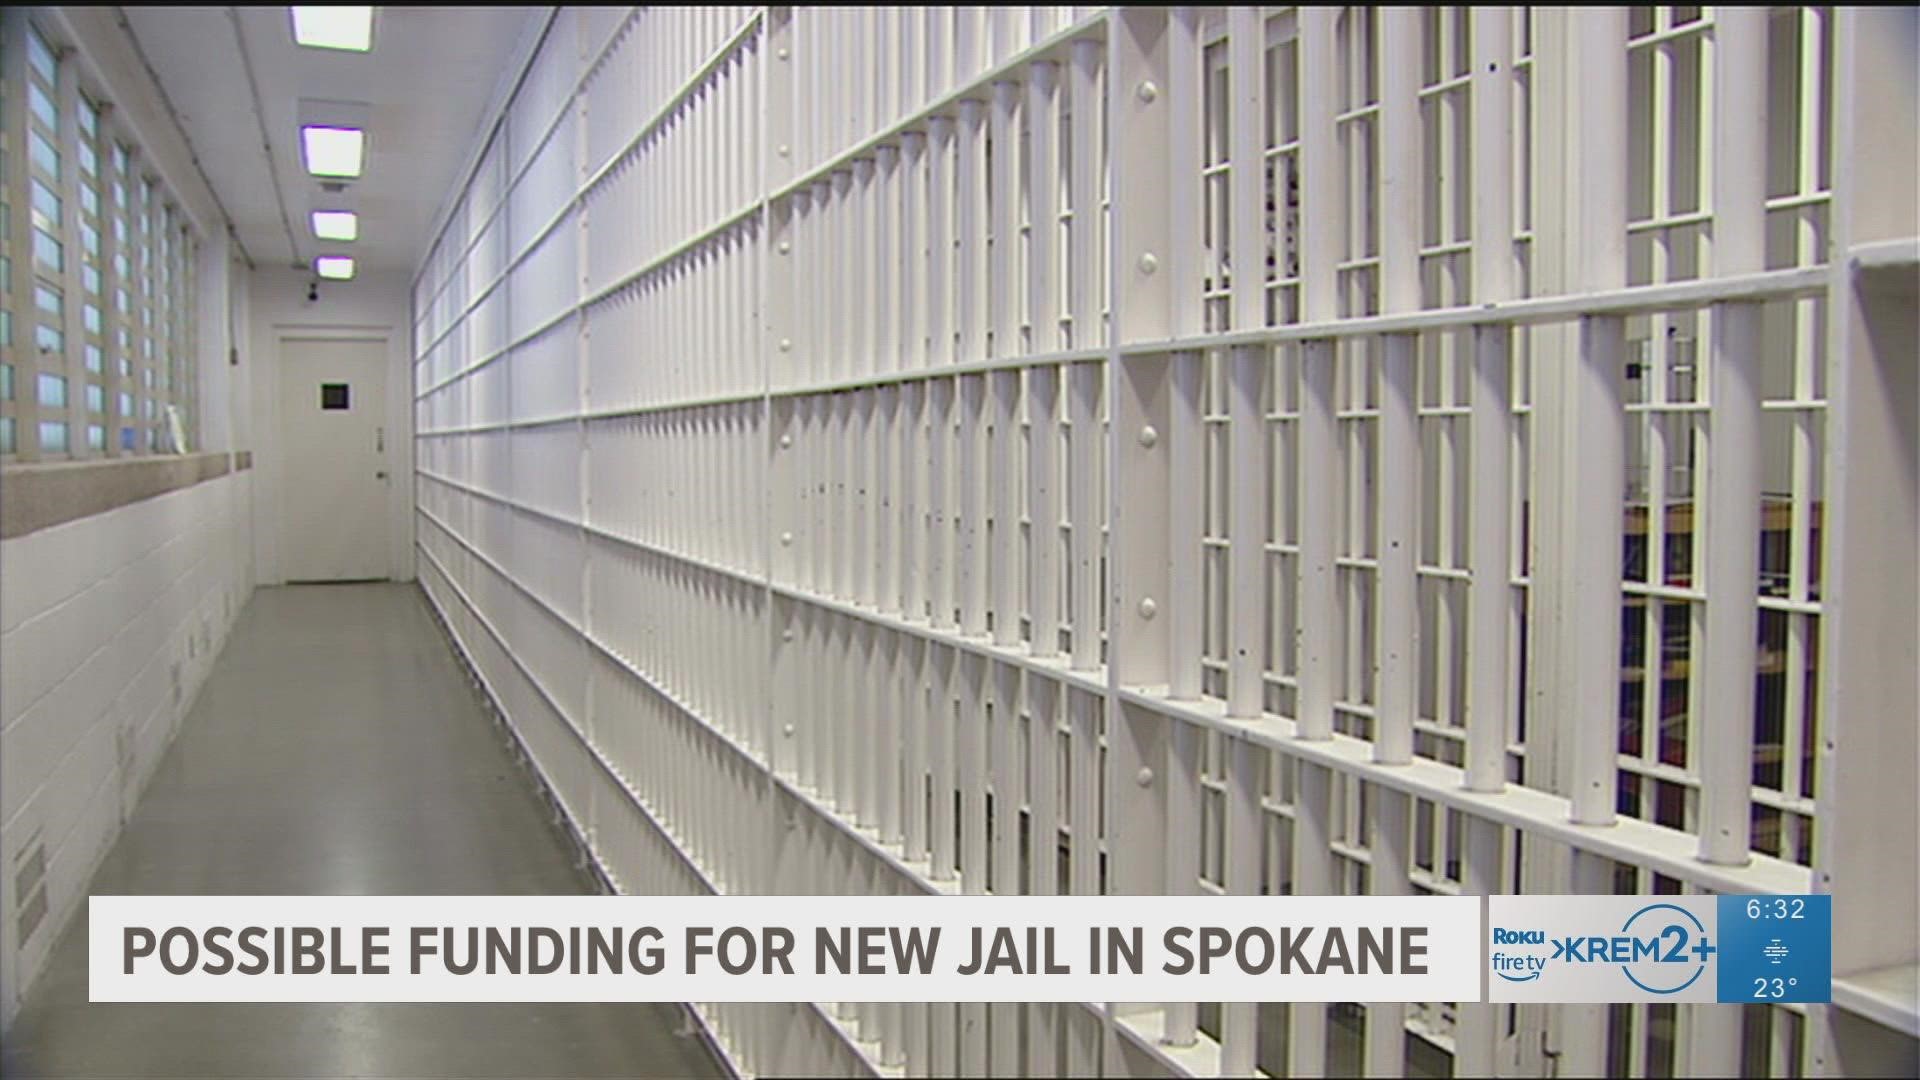 Spokane County Commissioners voted to put a measure on the Nov. 2023 ballot seeking a 0.2% sales tax increase. If approved, funding will be used to build a new jail